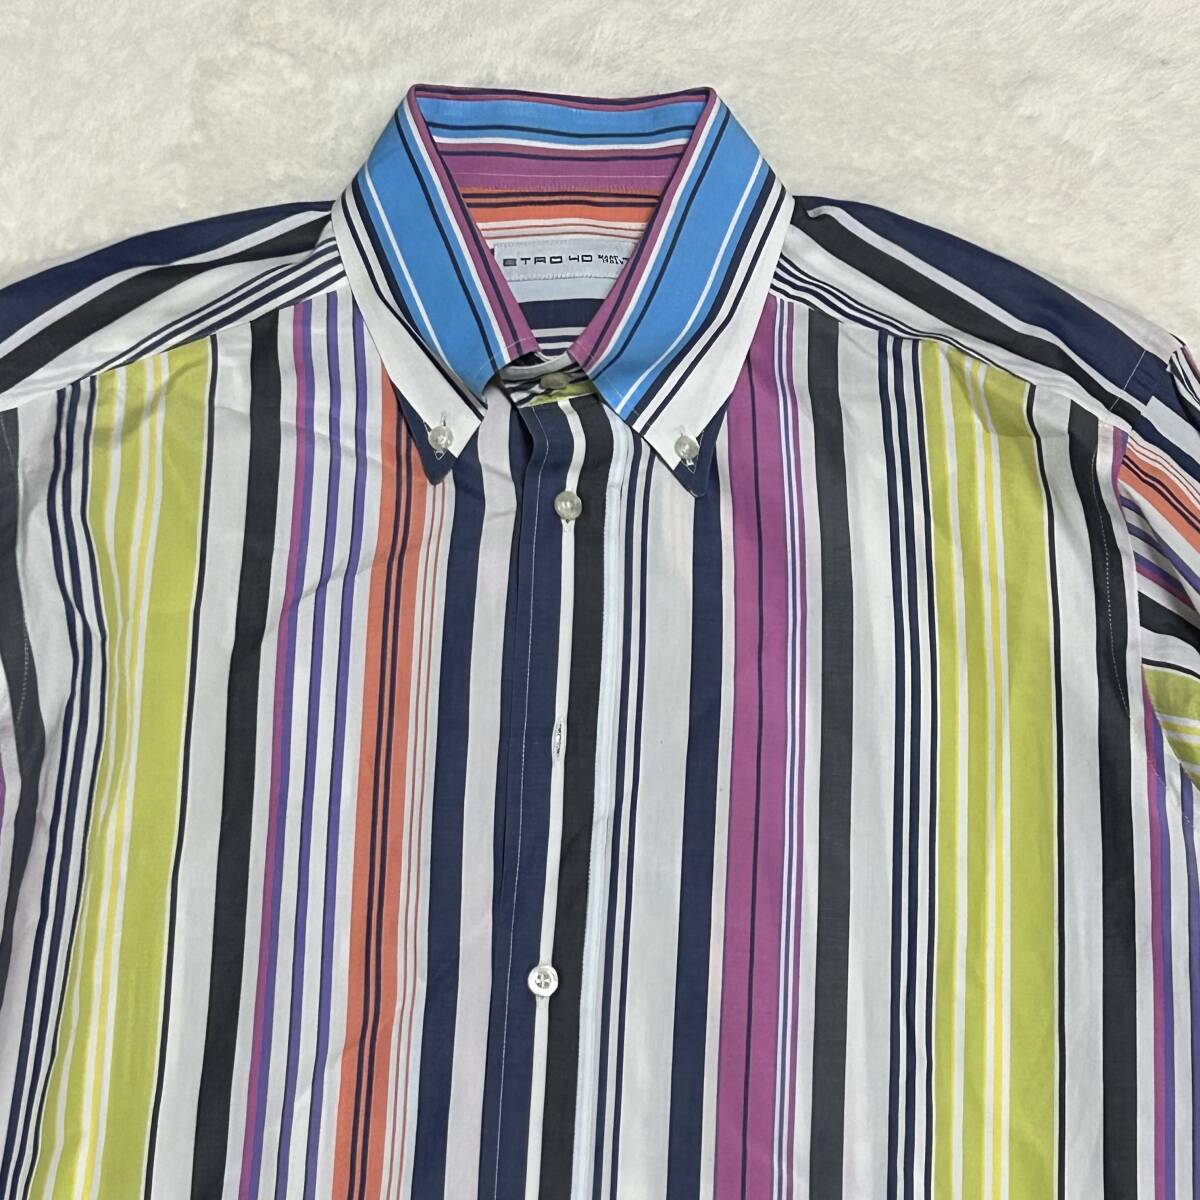  ultimate beautiful goods Etro ETRO button down long sleeve shirt multi stripe 40 Japan size L green pink through year Italy made 